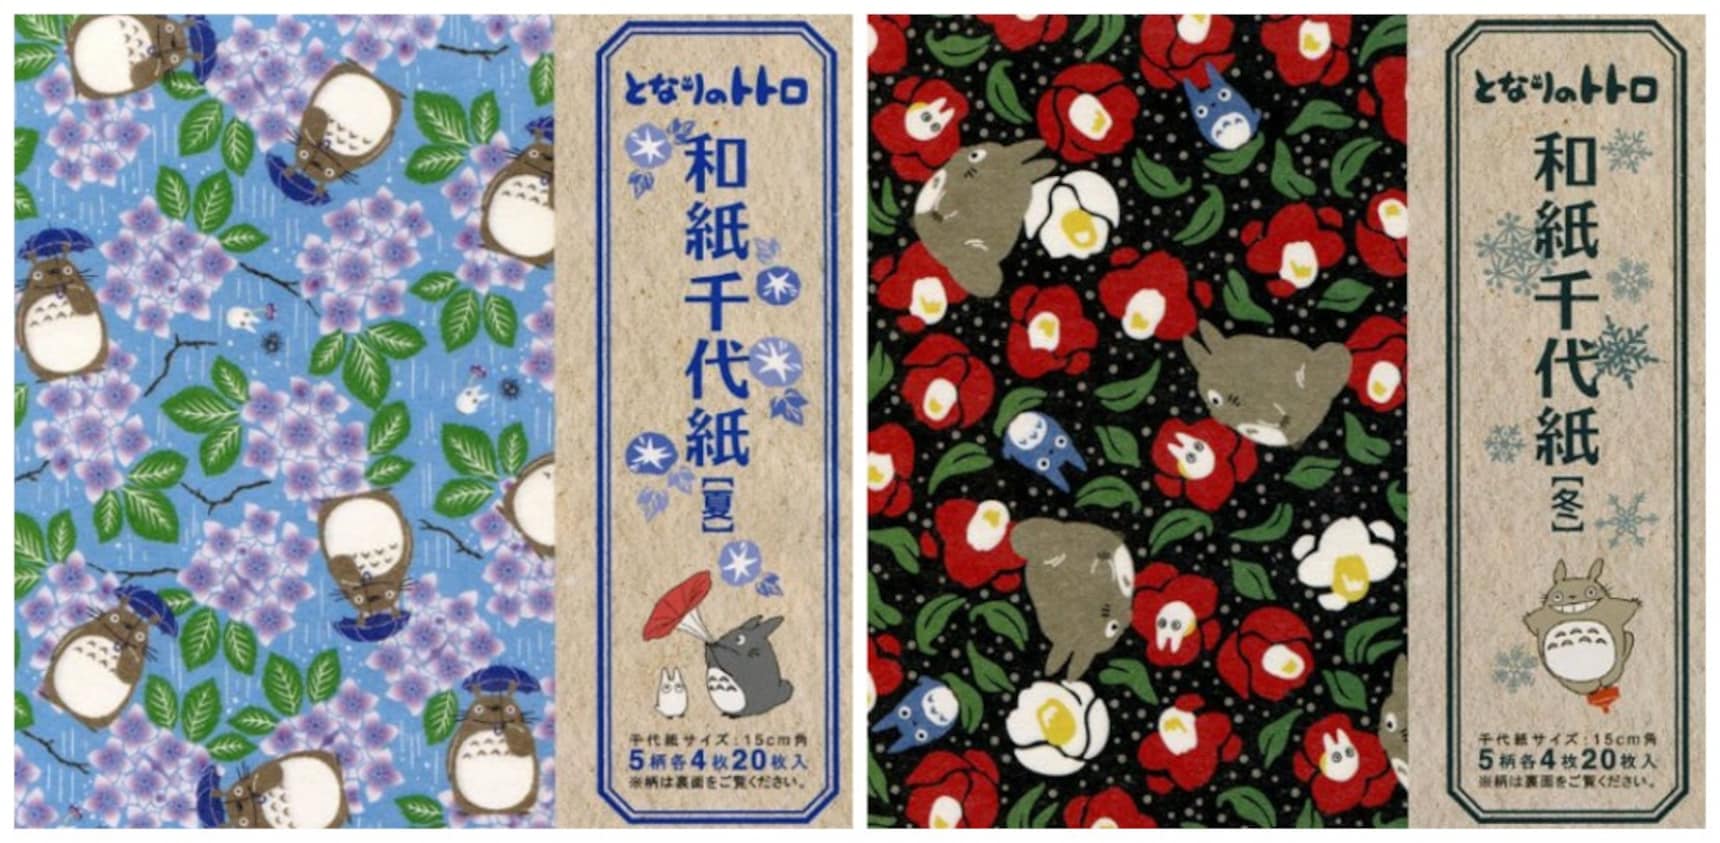 Totoro Washi Paper for All 4 Seasons